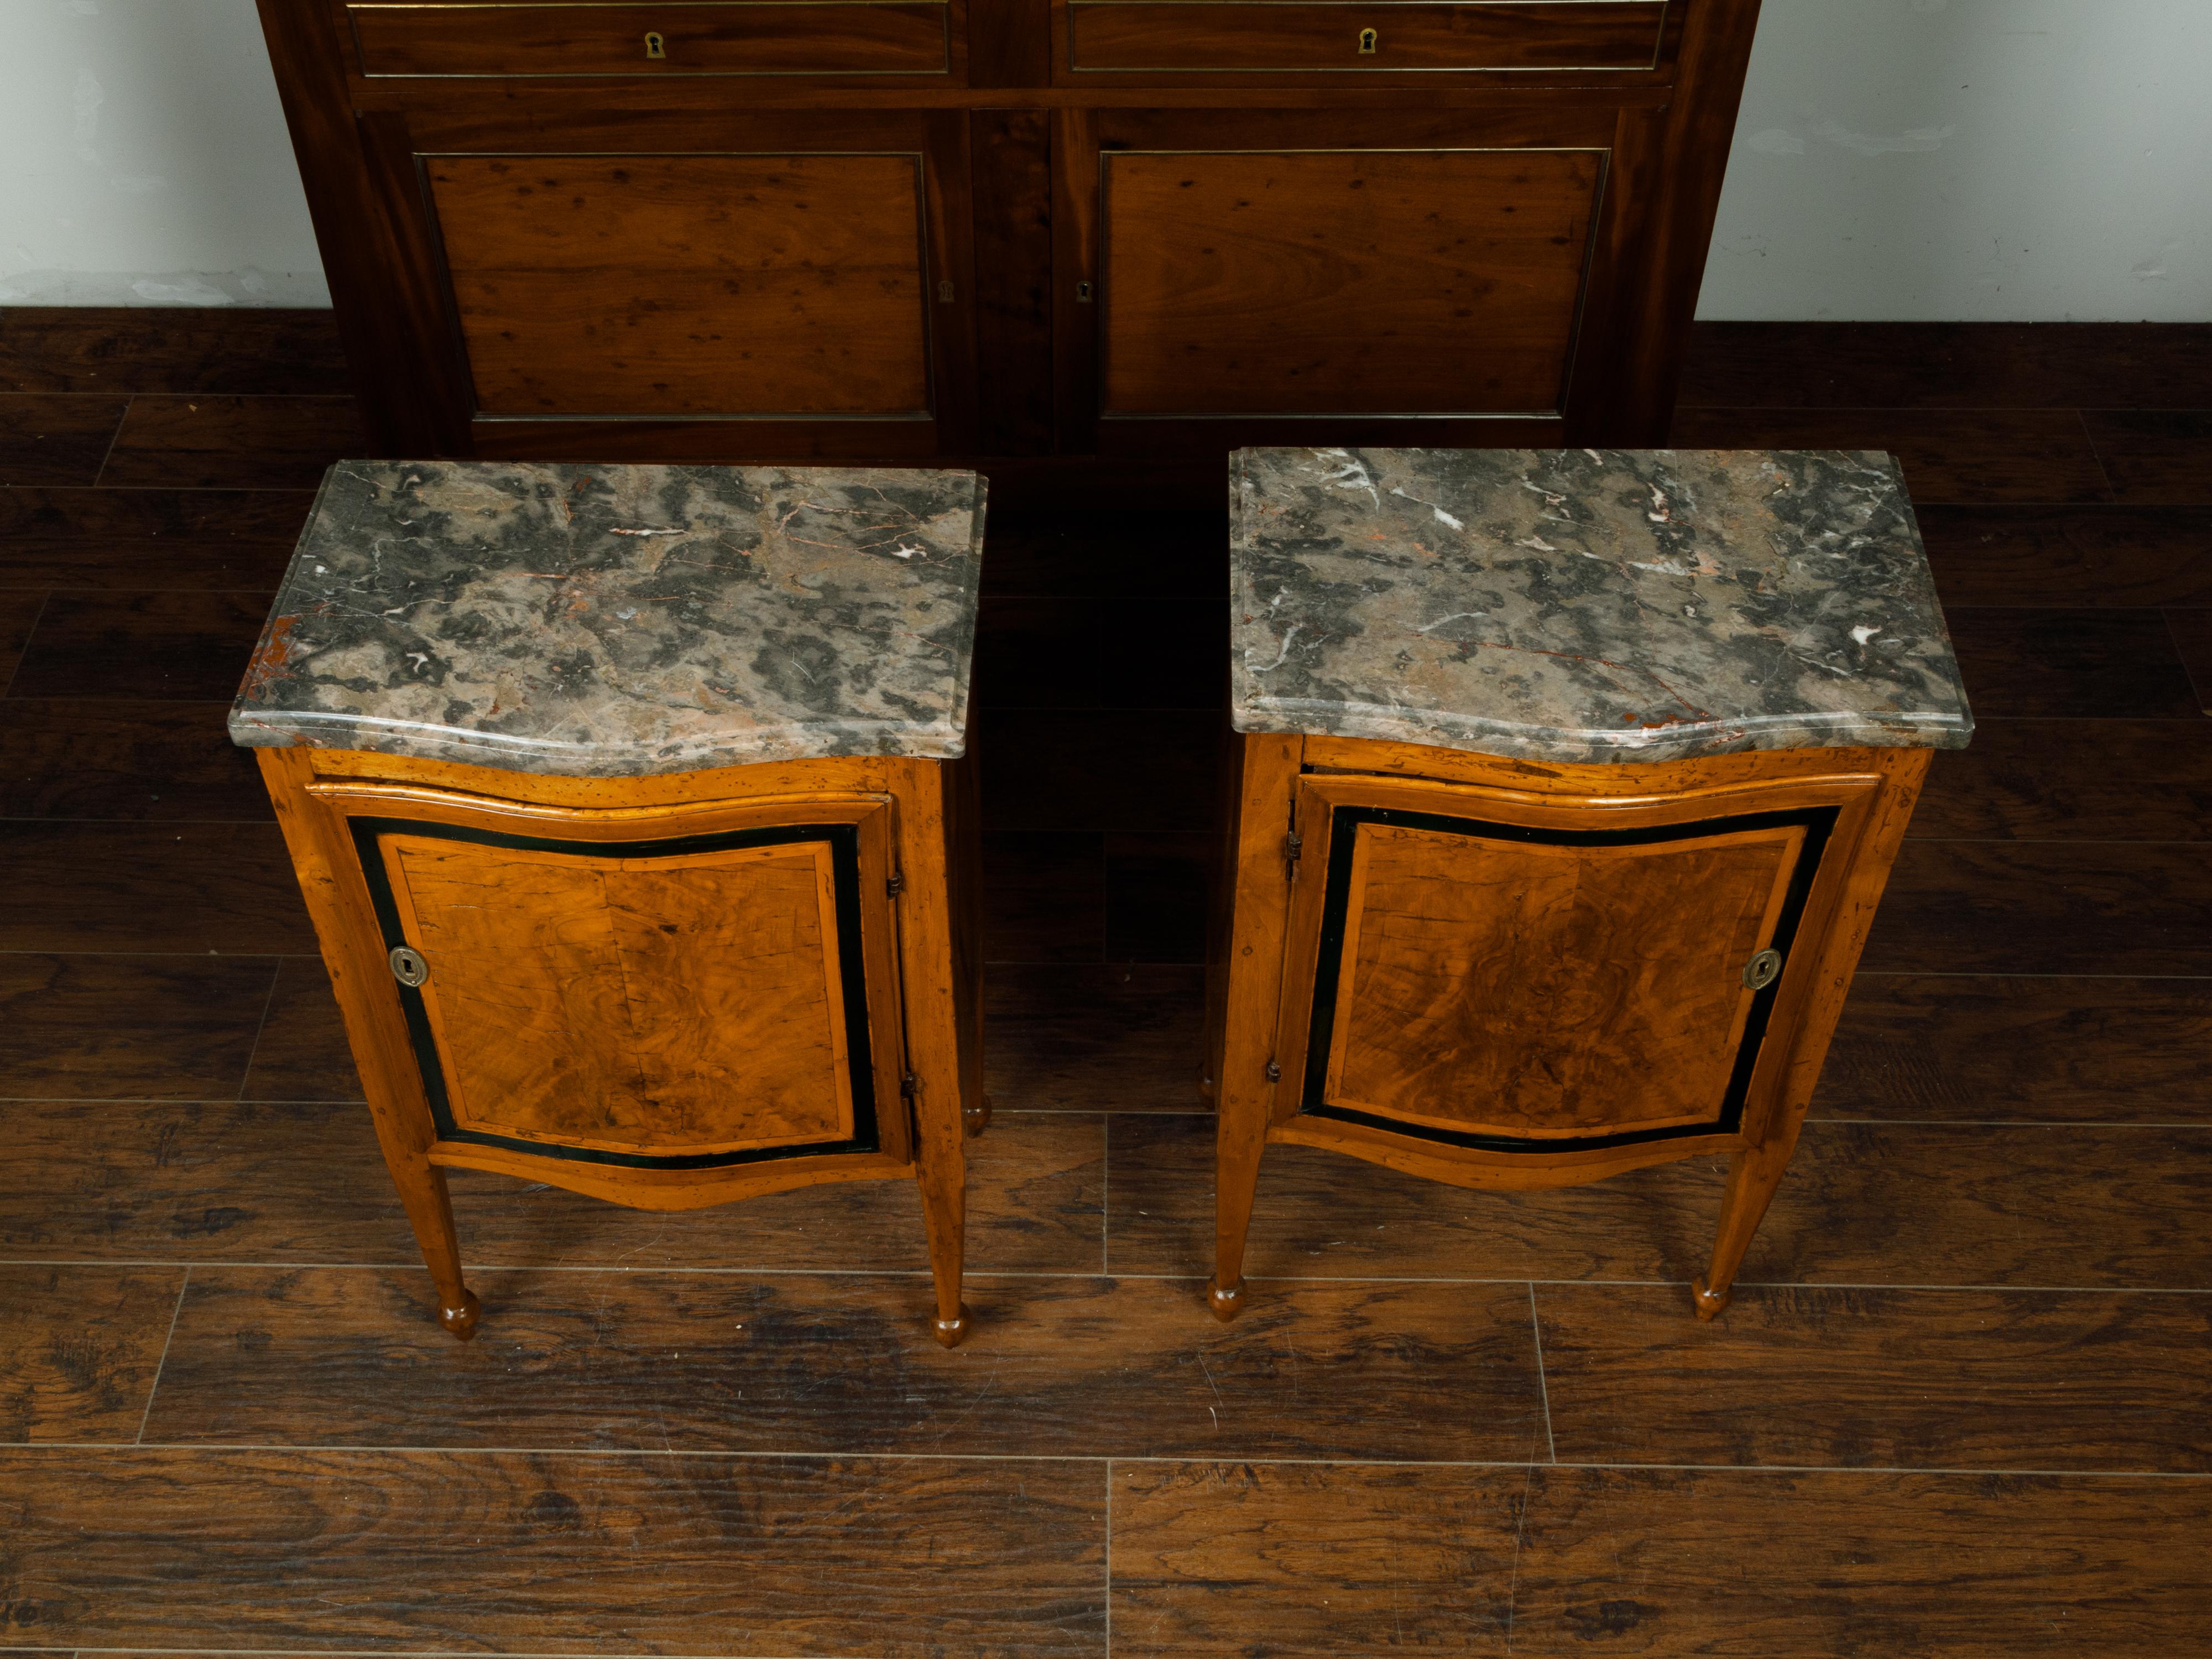 Pair of Italian 1840s Walnut Tables with Variegated Marble Top and Single Door In Good Condition For Sale In Atlanta, GA